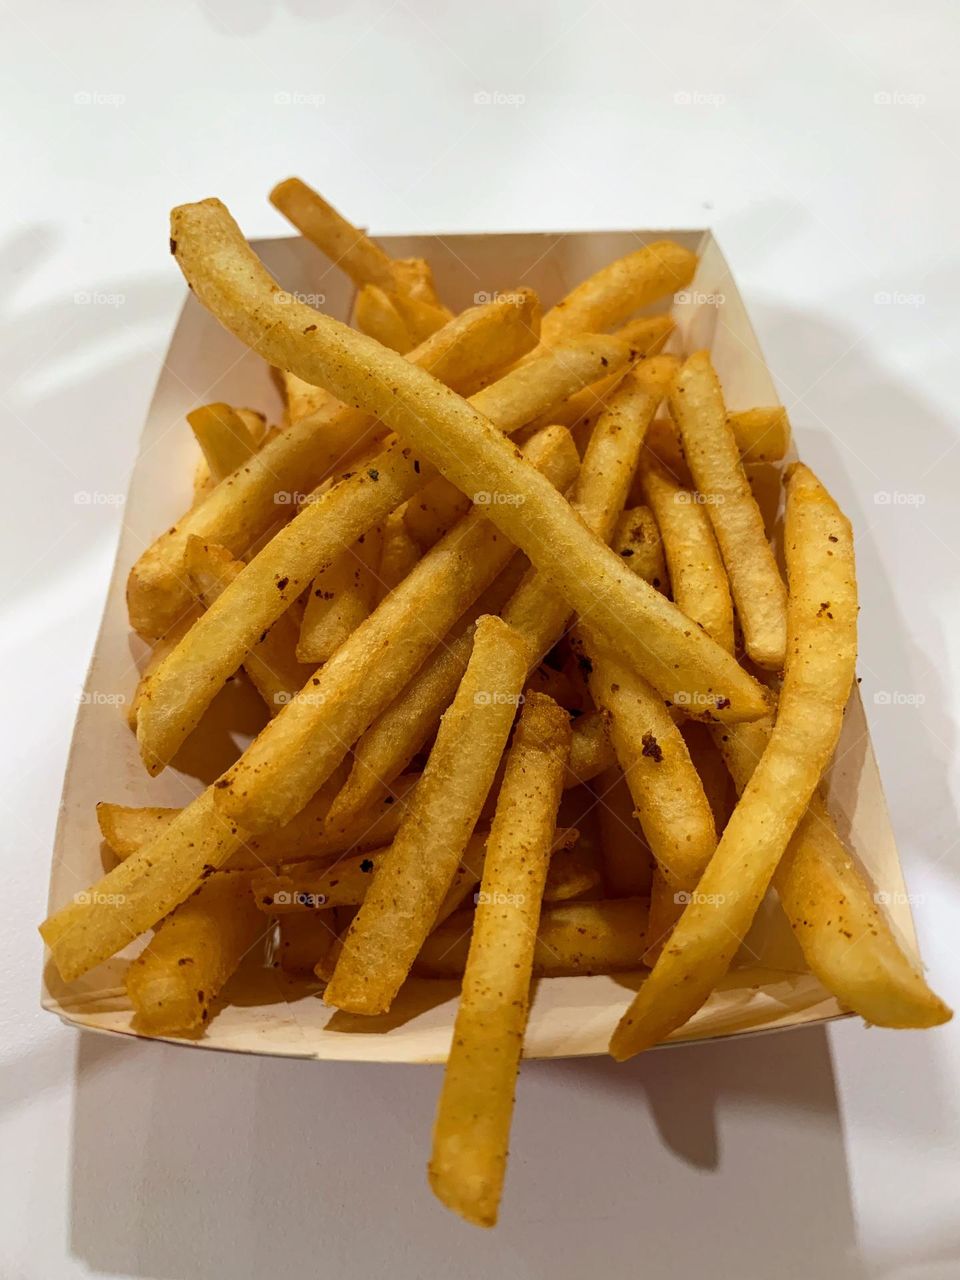 Golden and crispy French fries, perfect for snacking or as a side. Shot to showcase their delicious texture and detail. Ideal for food bloggers, restaurants, and marketing materials.